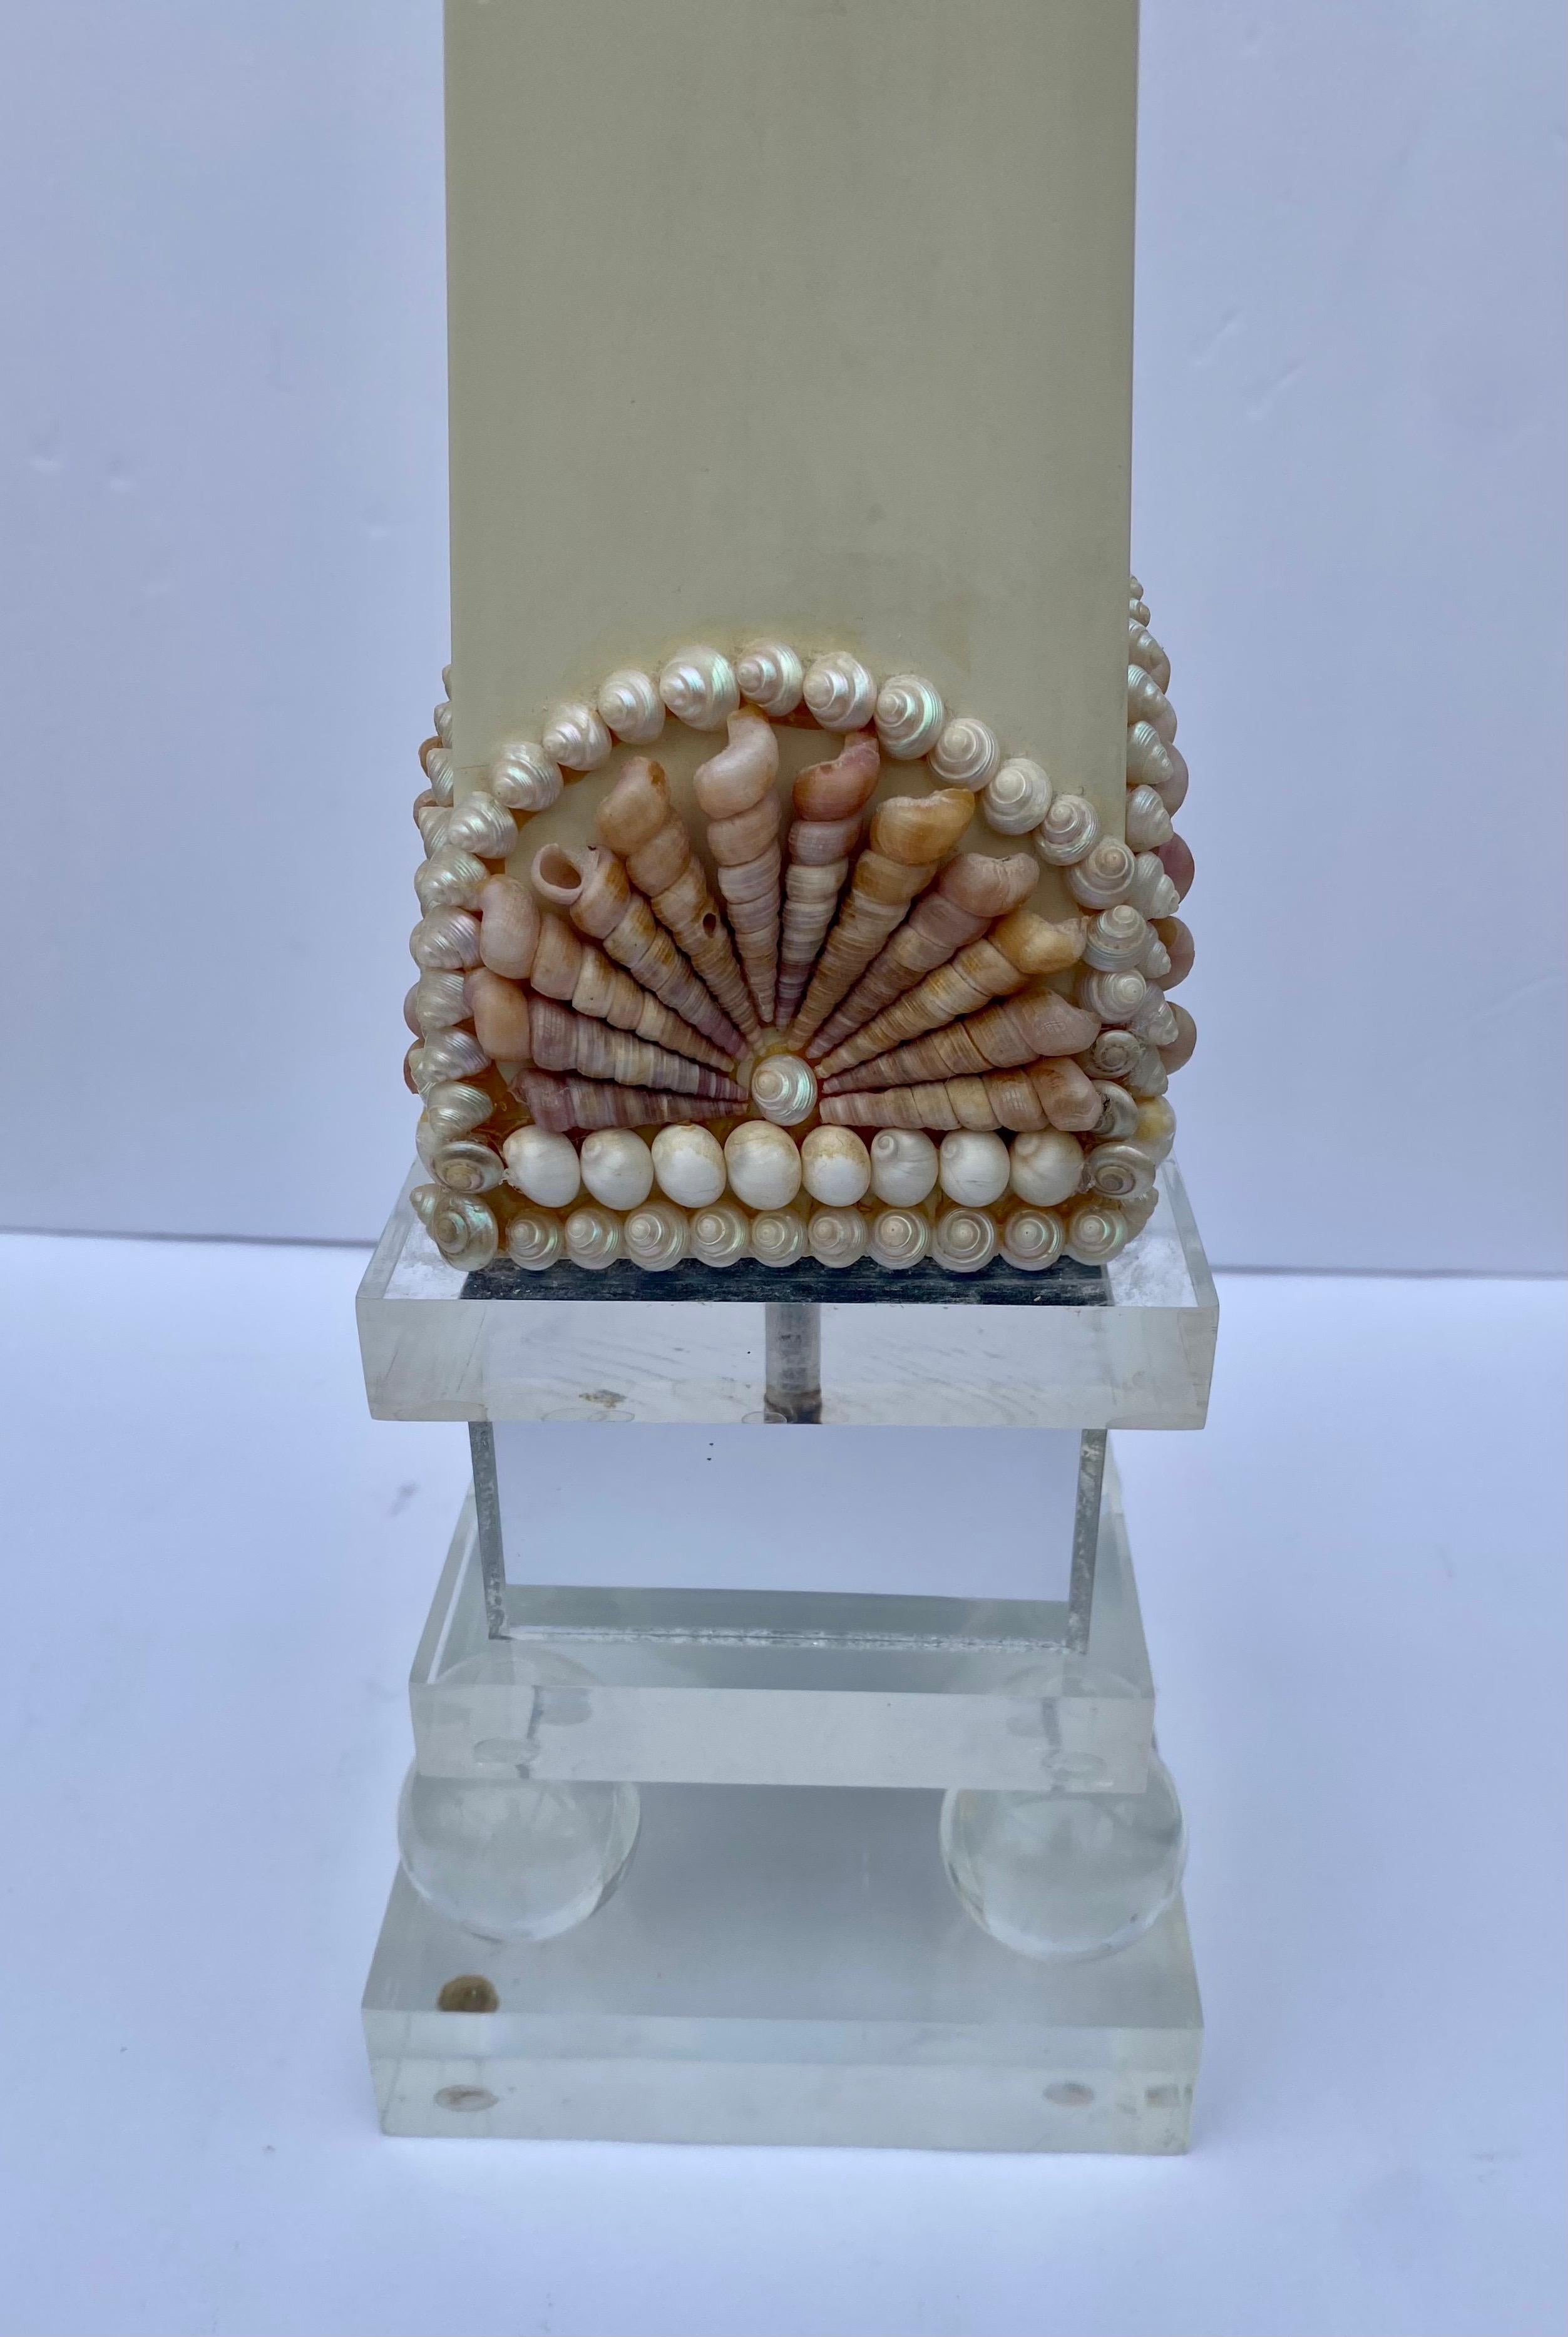 Post Modern 1980s Lucite Shell Seashell Mirror Lacquer Obelisk Table Sculpture For Sale 2